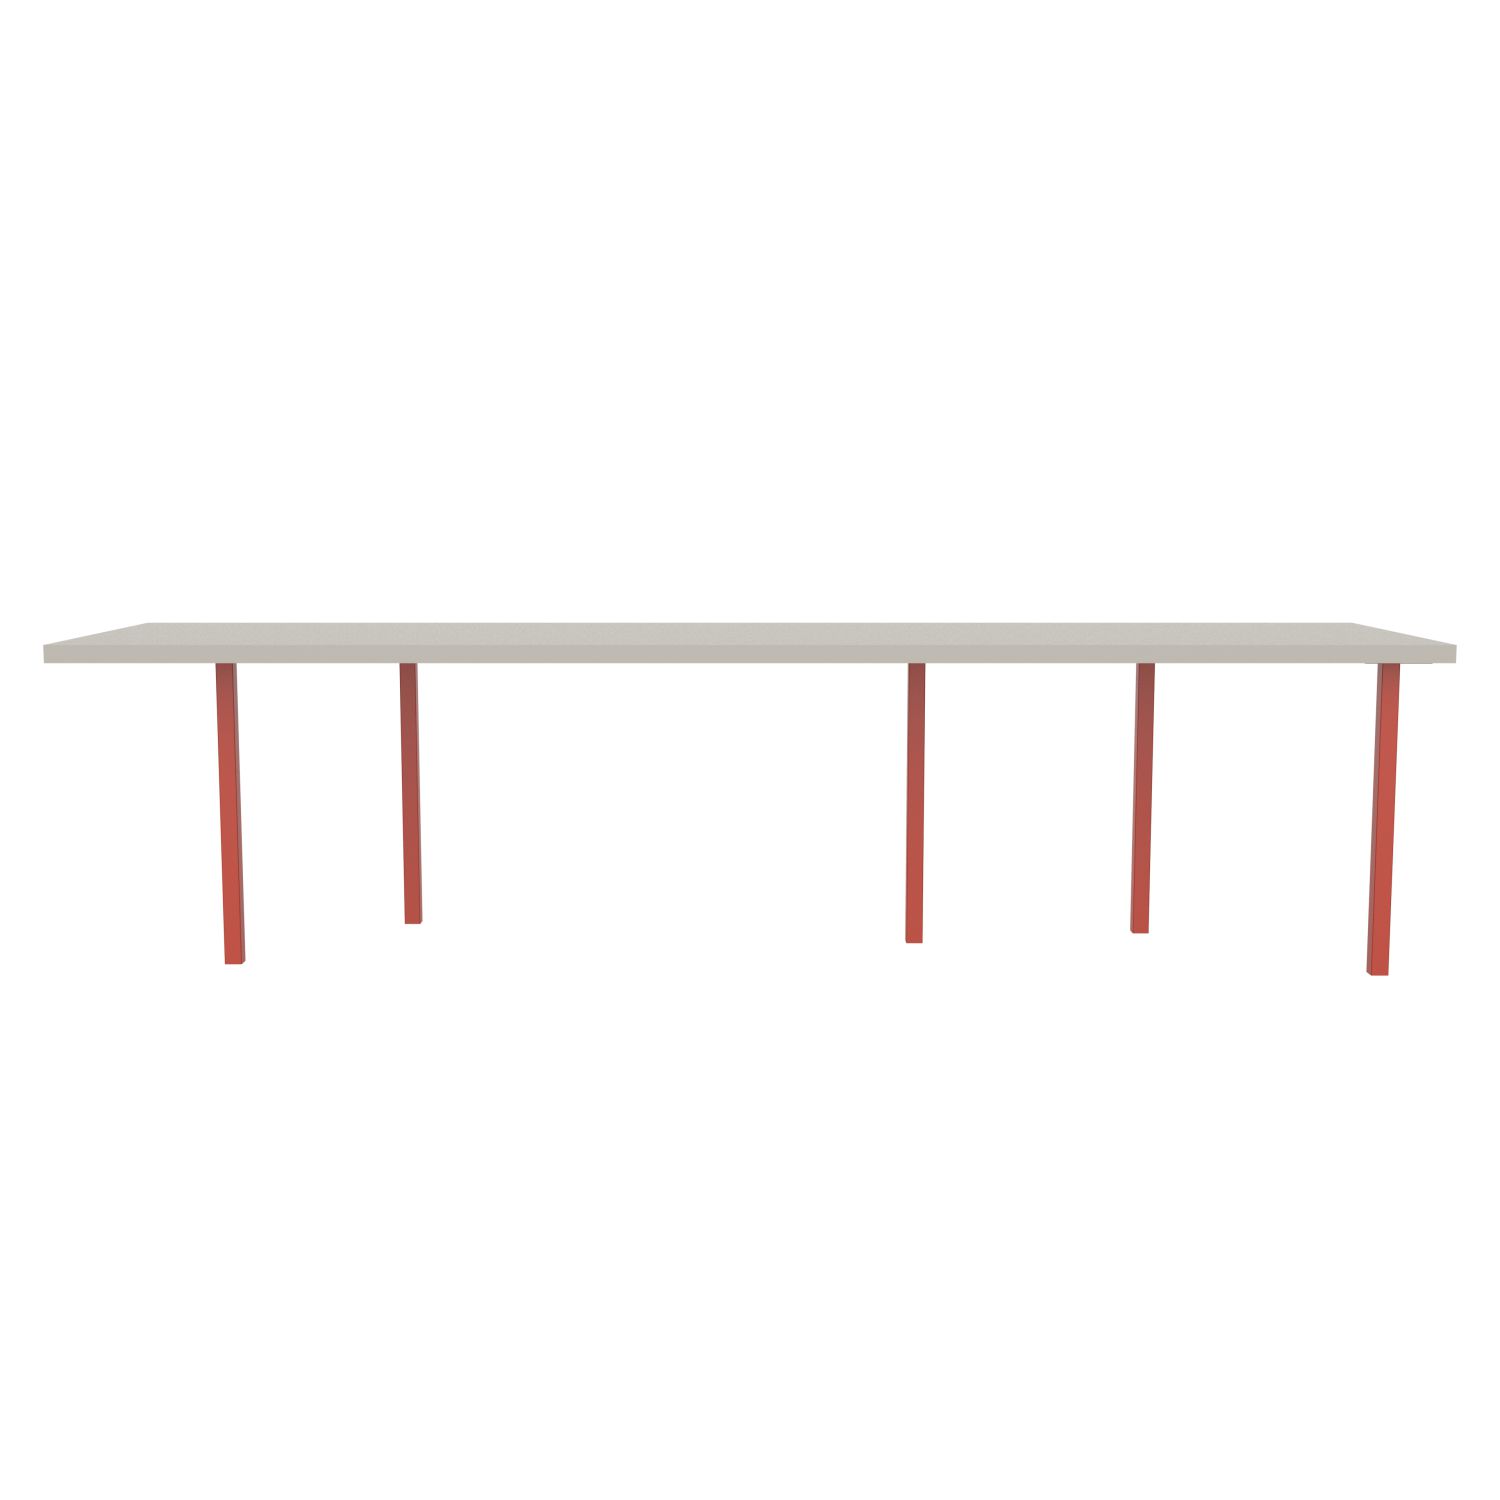 lensvelt bbrand table five fixed heigt 80x310 hpl white 50 mm price level 1 vermilion red ral2002